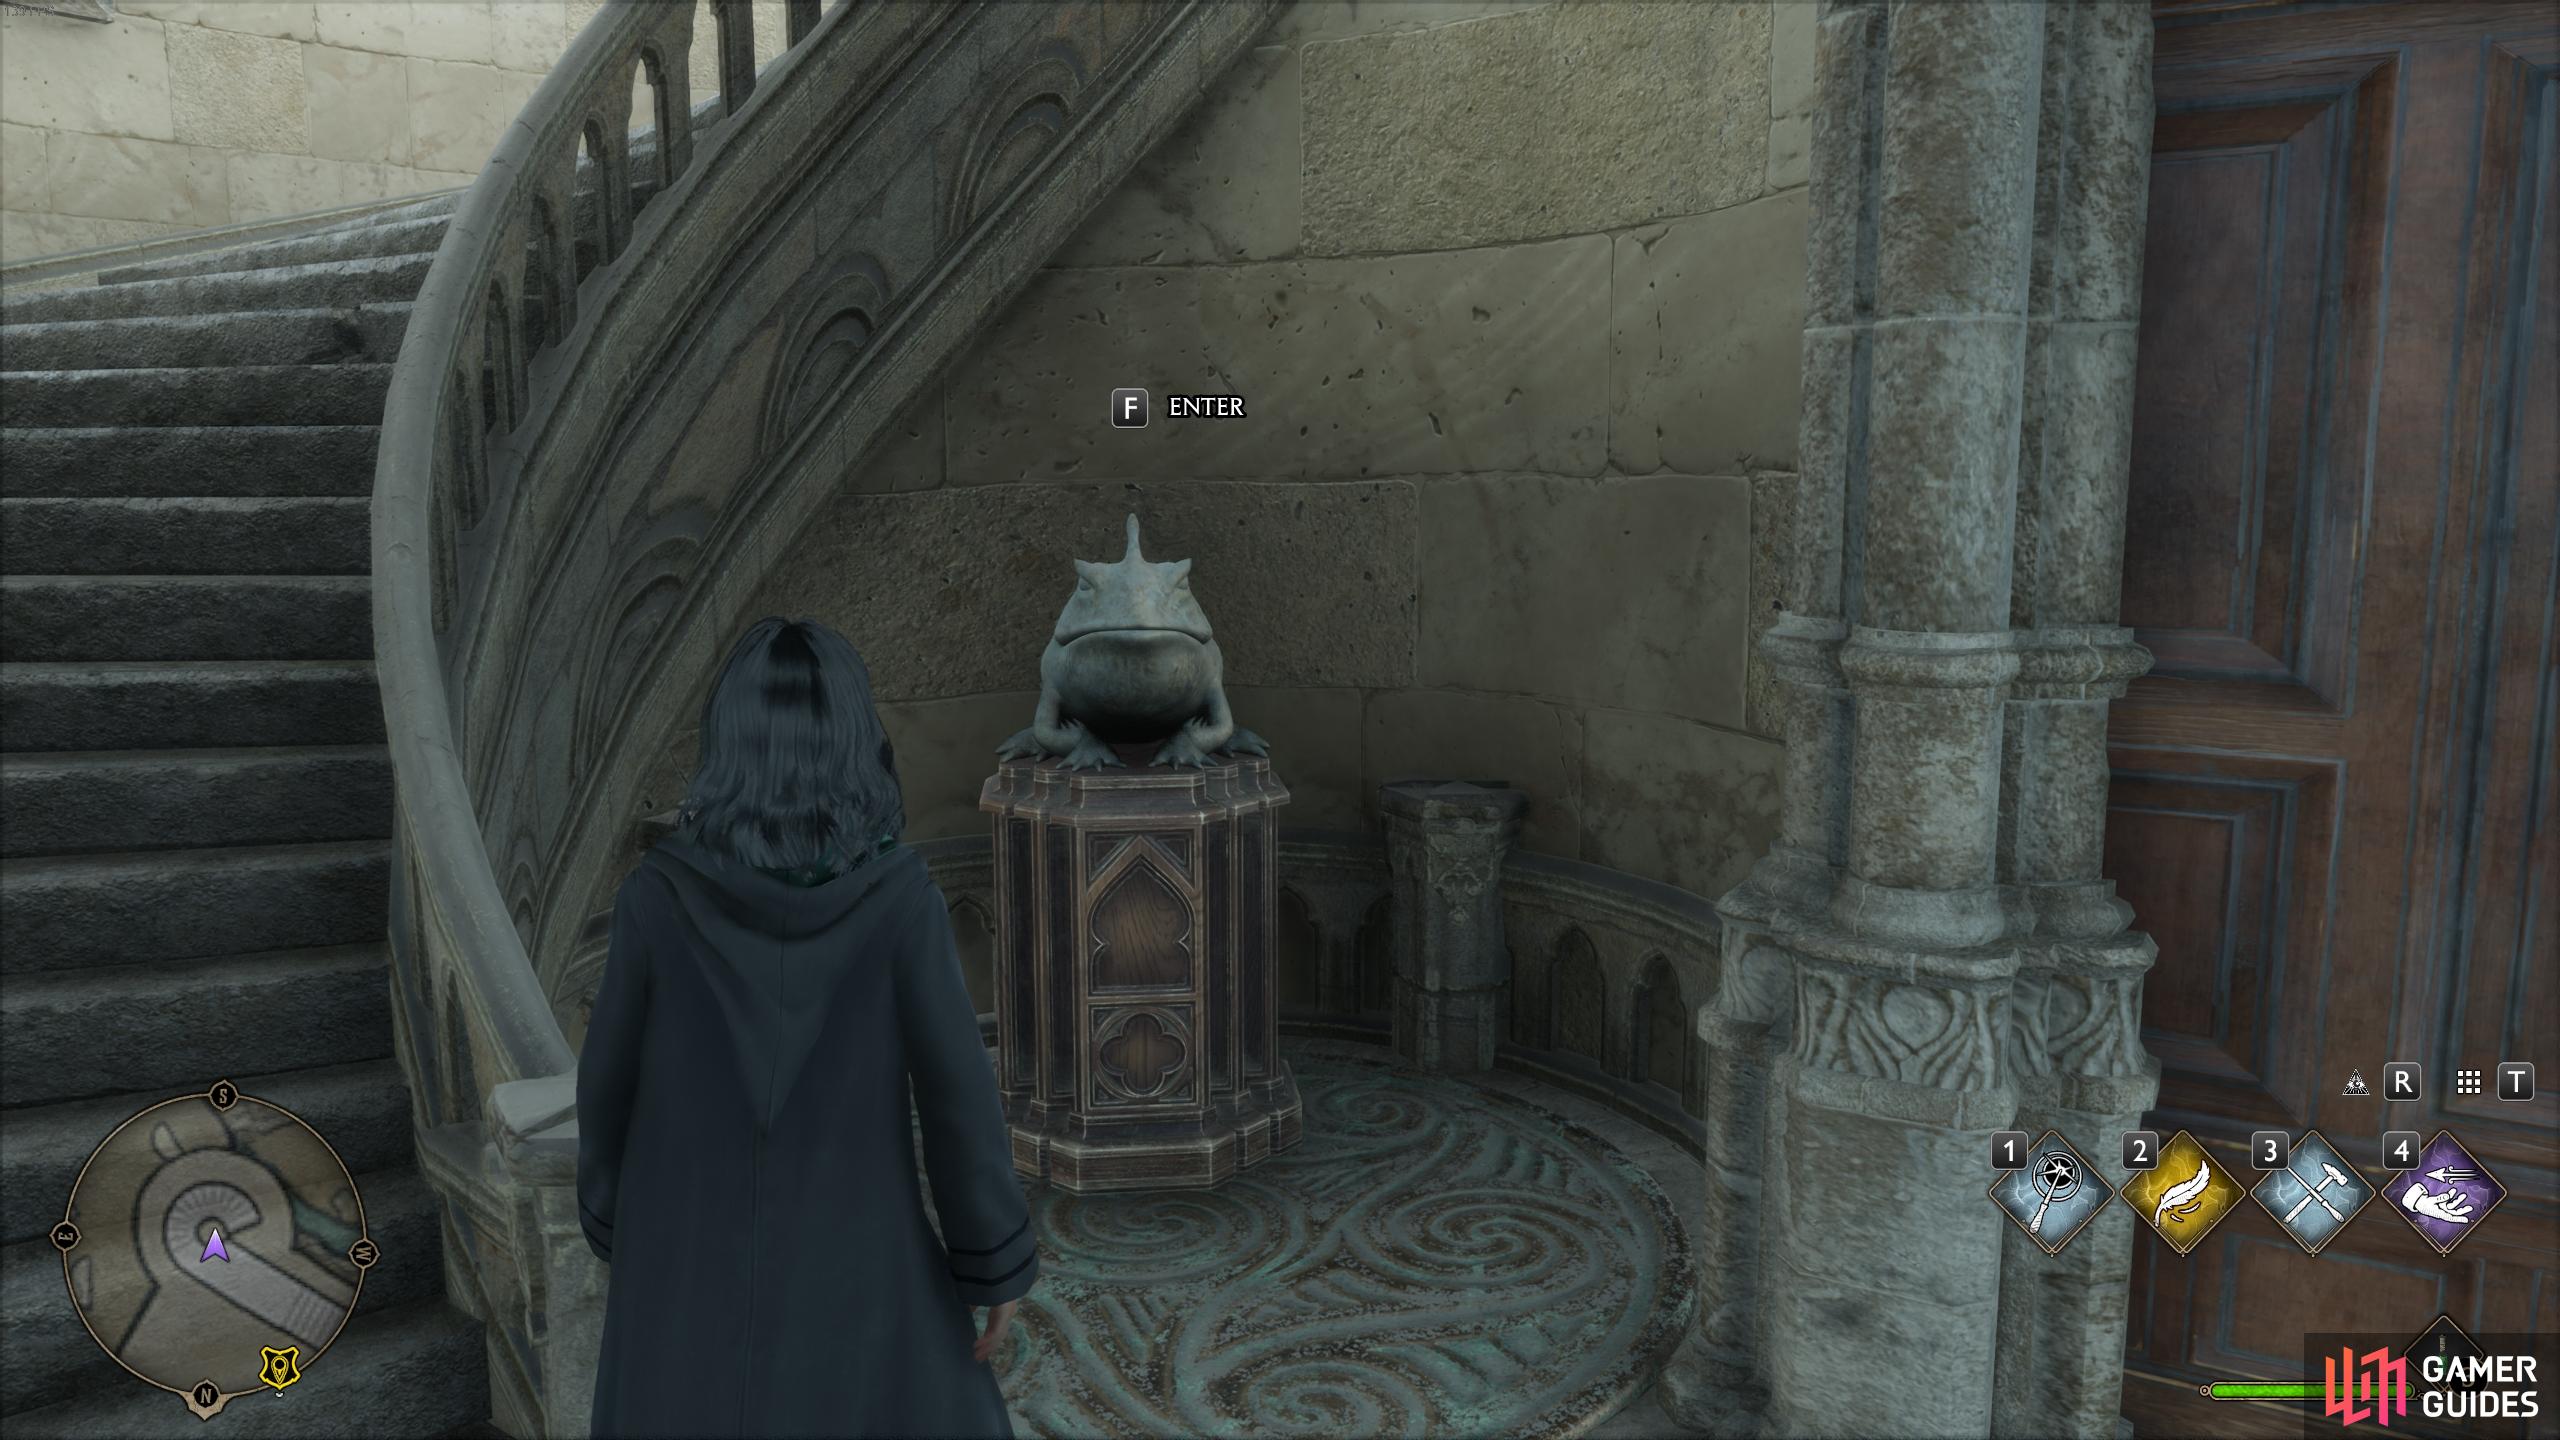 Interact with the statue of the toad to enter the hidden room.